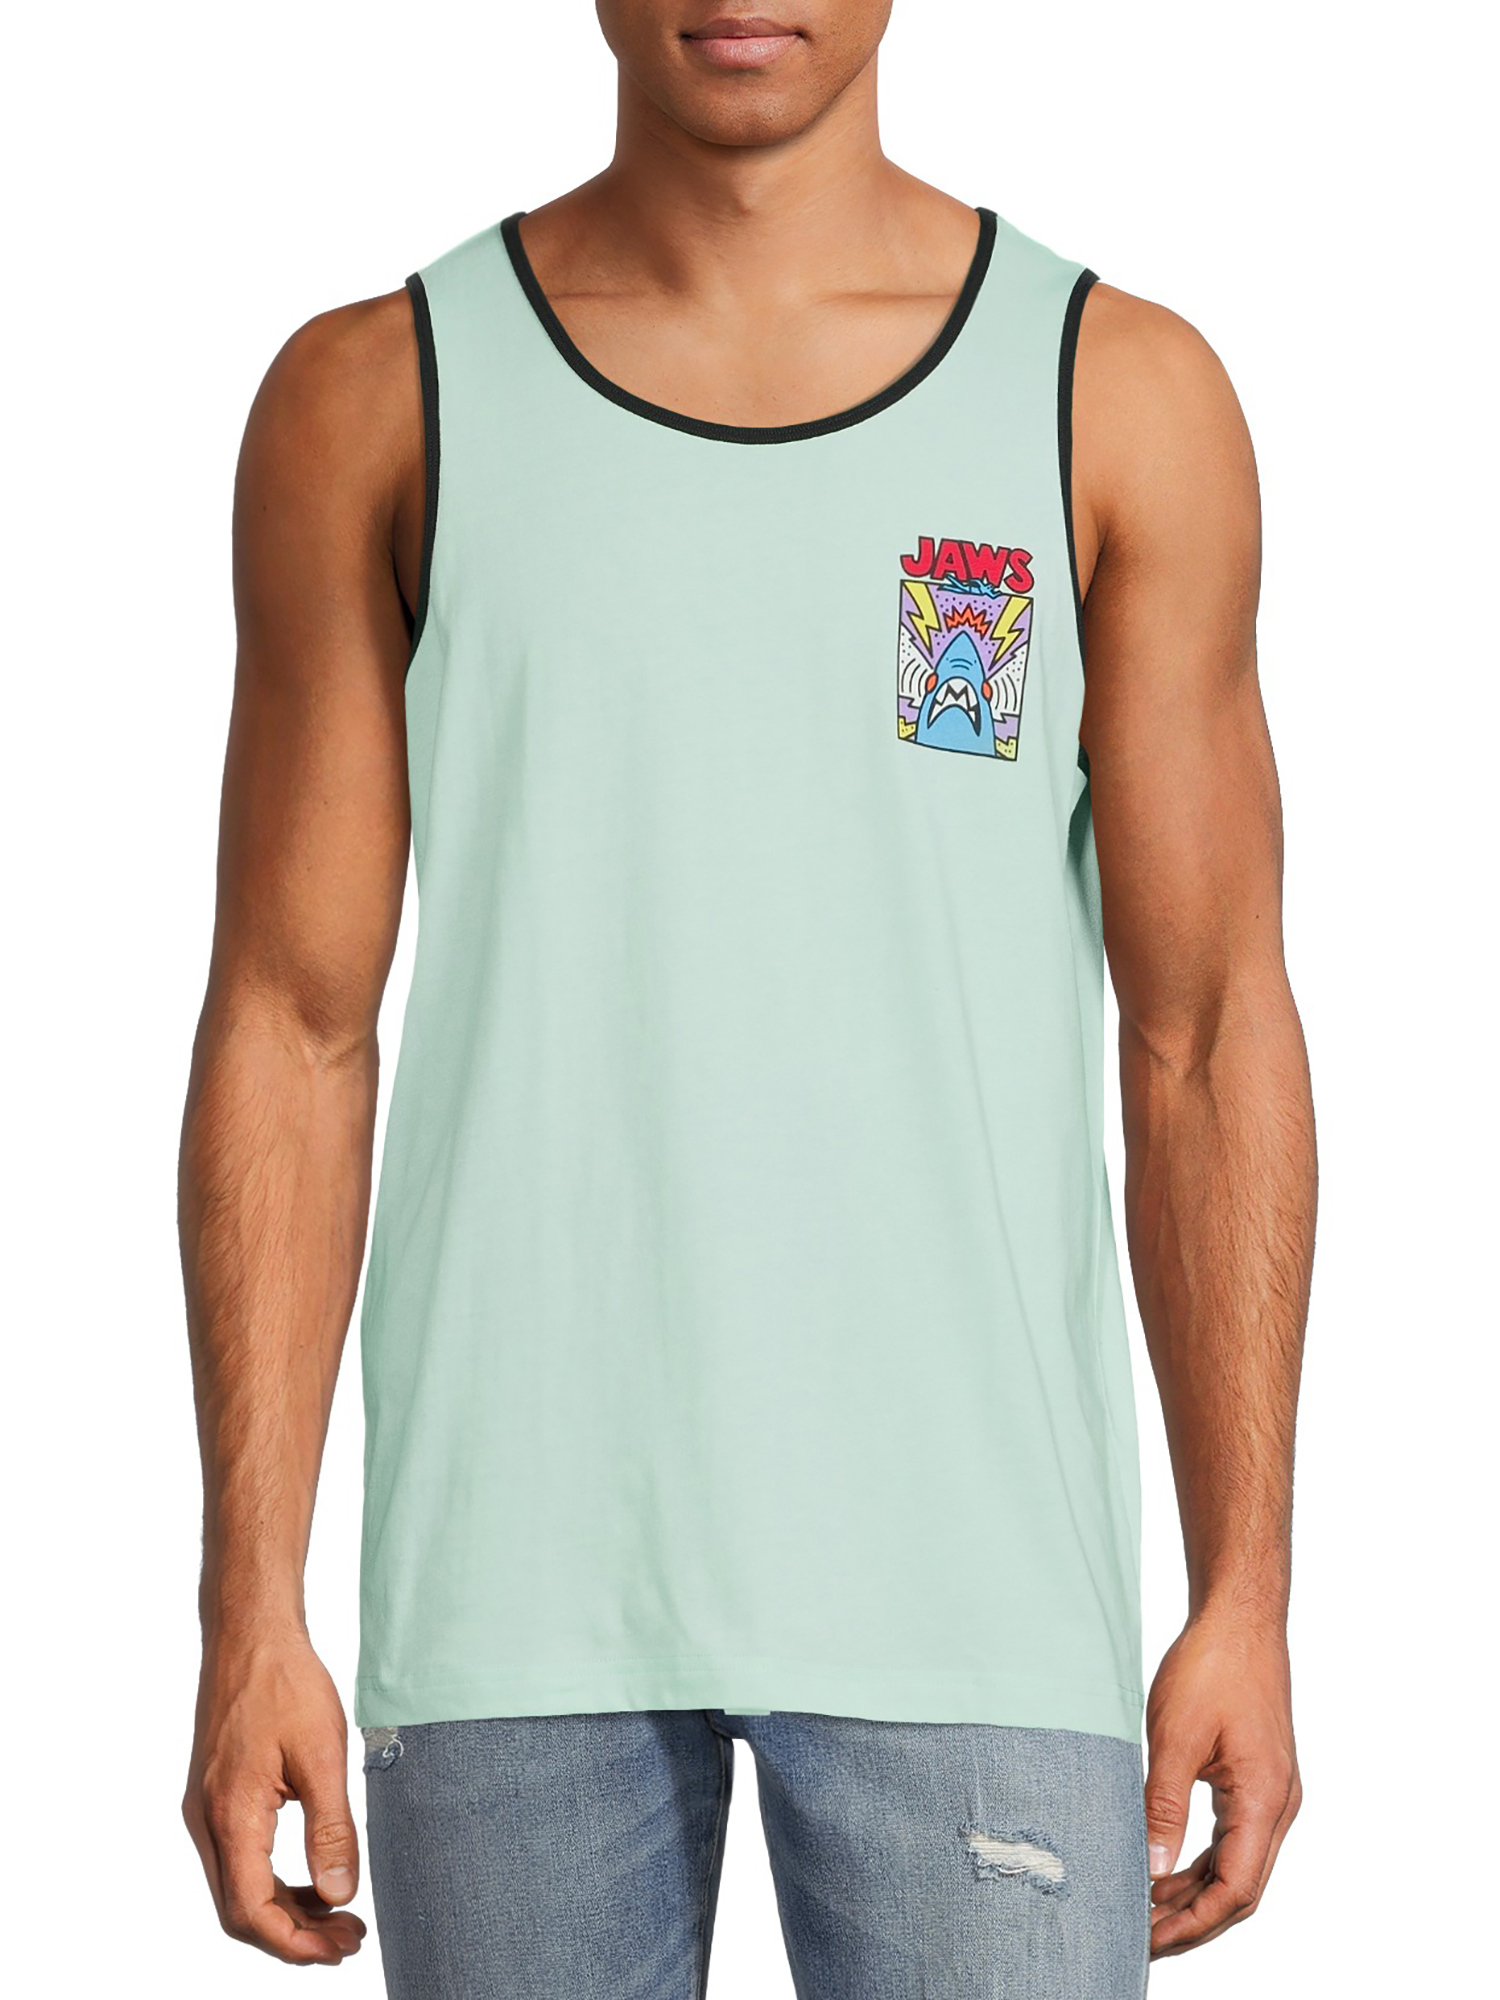 Universal by Jaws Sleeveless Graphic Print Tank Top (Men's or Men's Big & Tall) 2 Pack - image 3 of 9